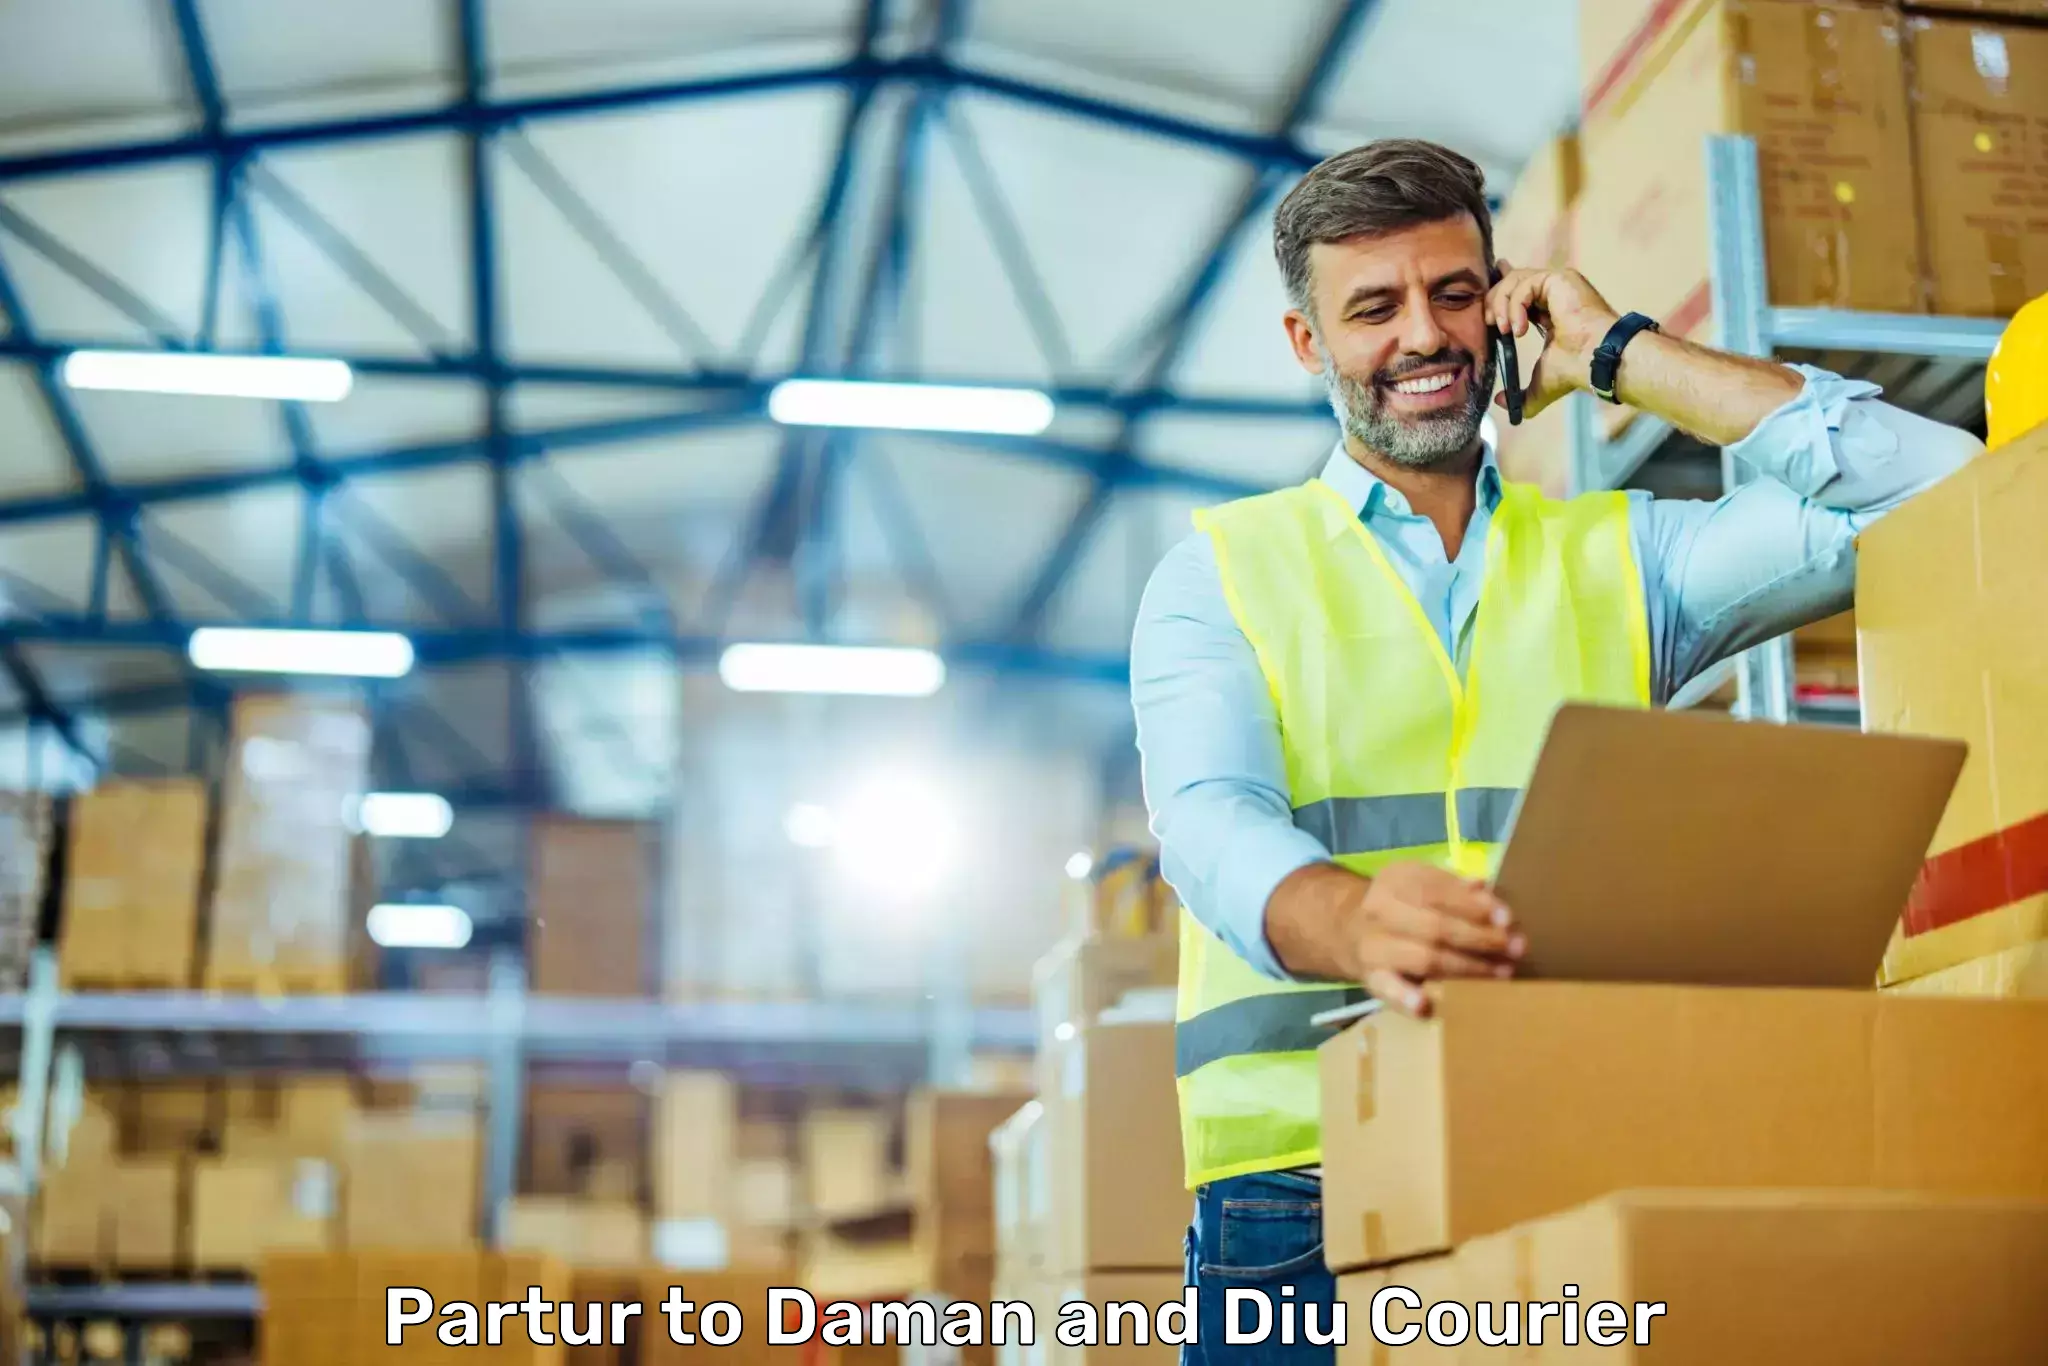 Flexible delivery scheduling Partur to Daman and Diu